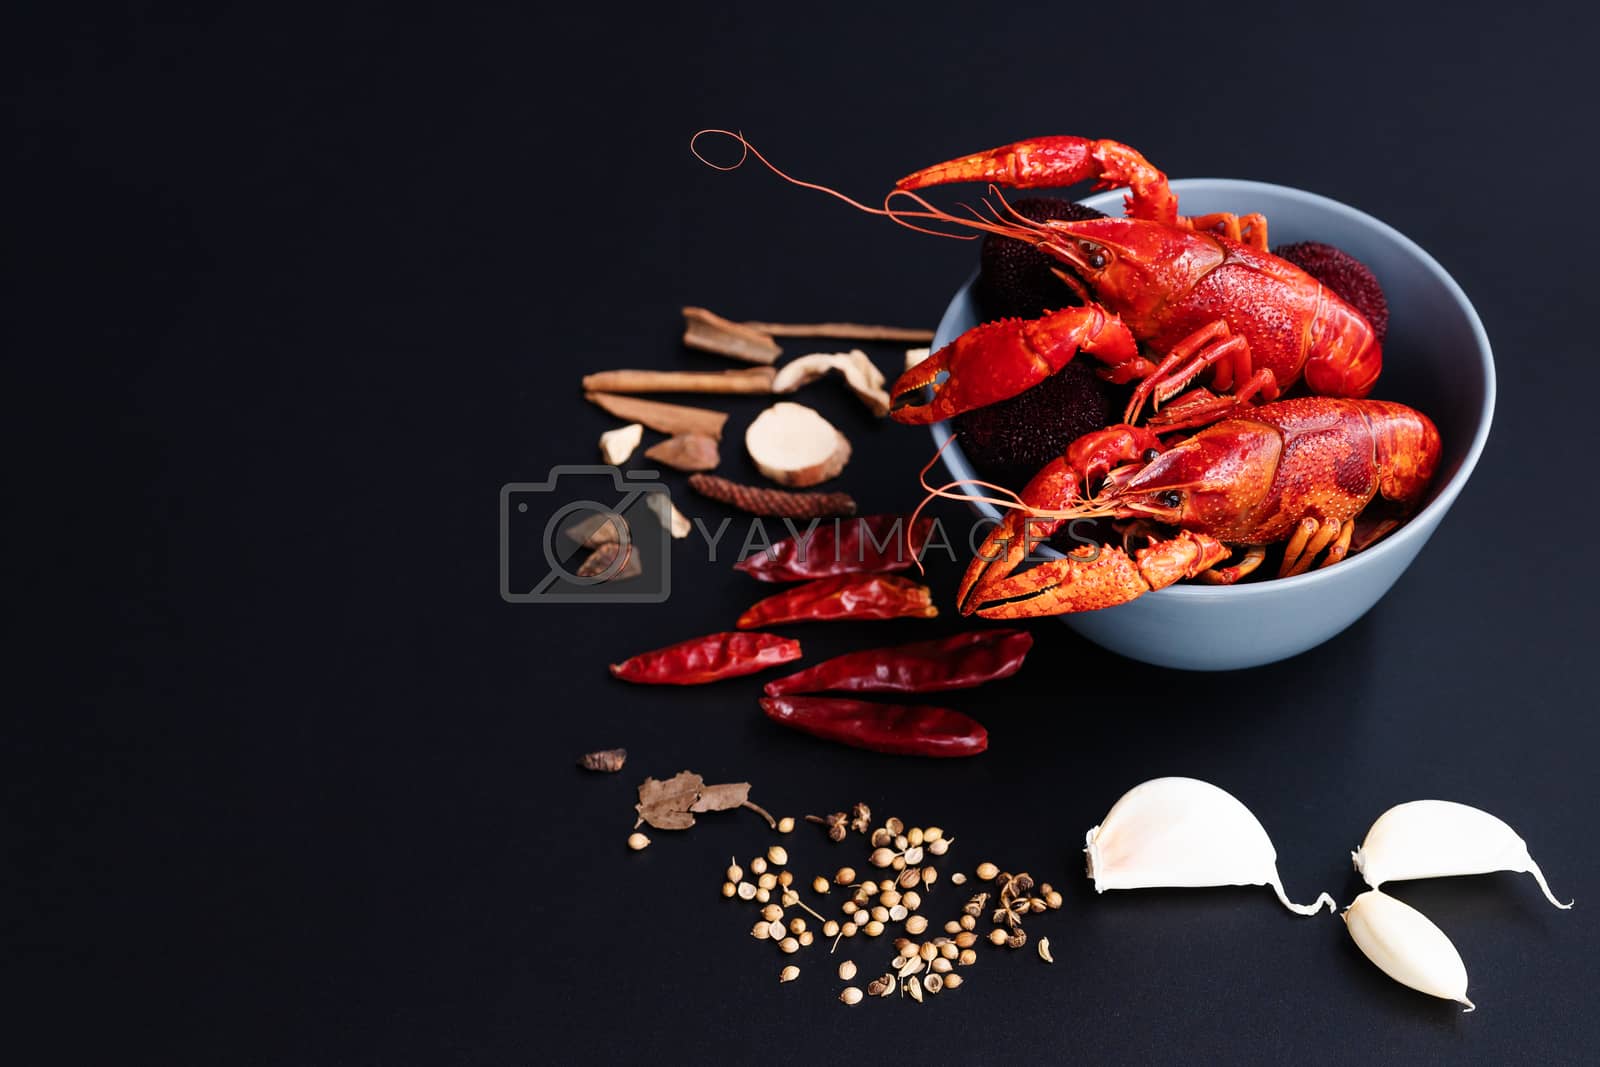 Royalty free image of Crayfish red, Baby Lobster with herb for stir fry on black backg by psodaz